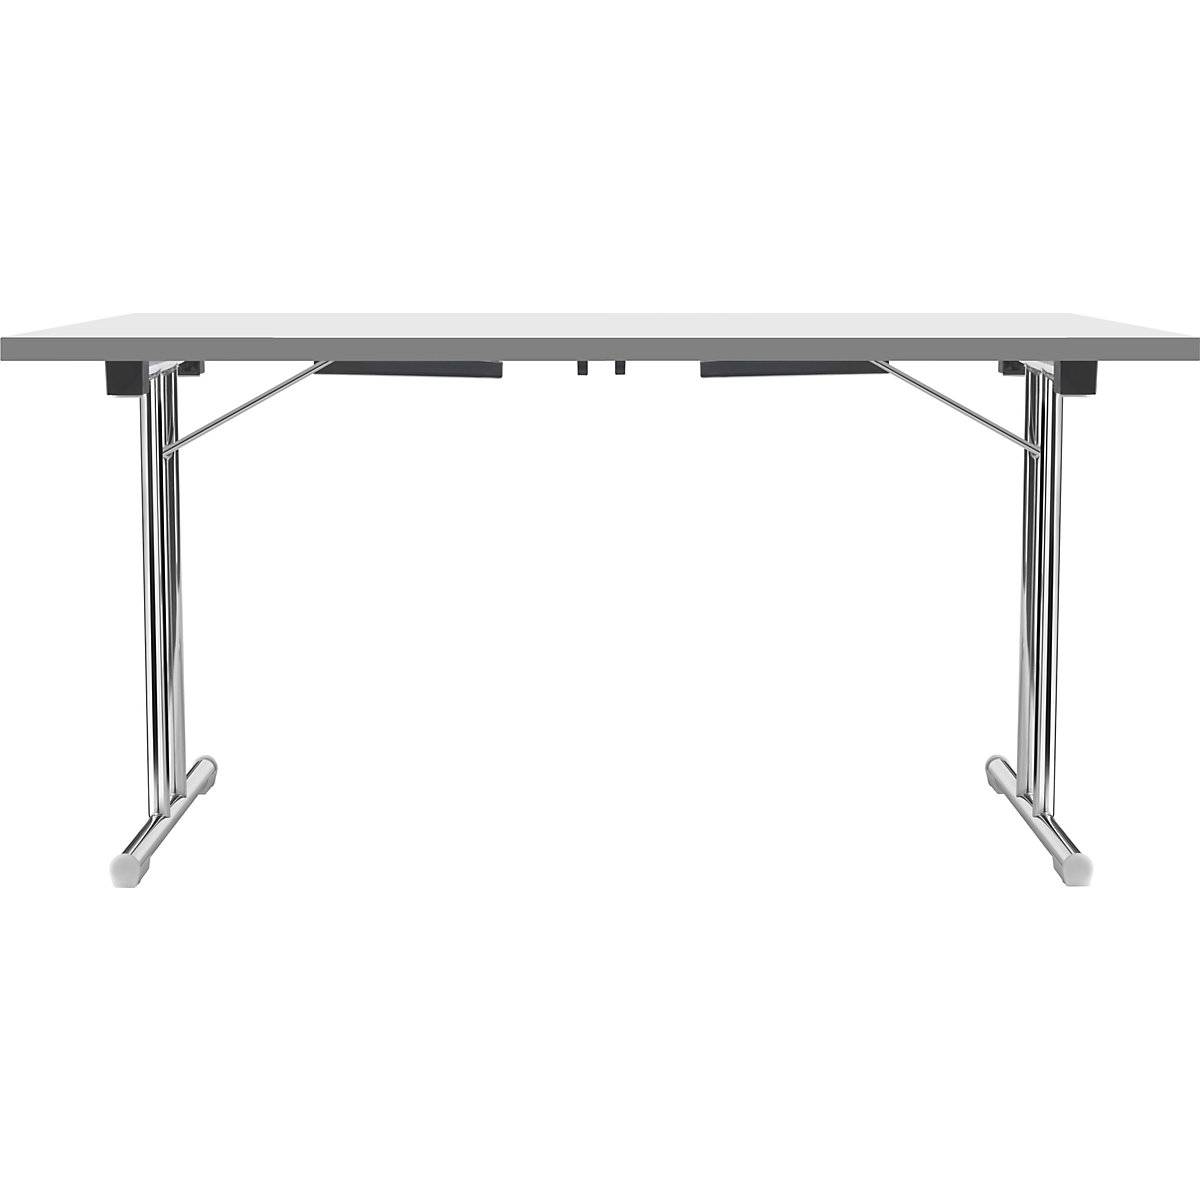 Folding table with double T base, tubular steel frame, chrome plated, white/charcoal, WxD 1200 x 600 mm-10